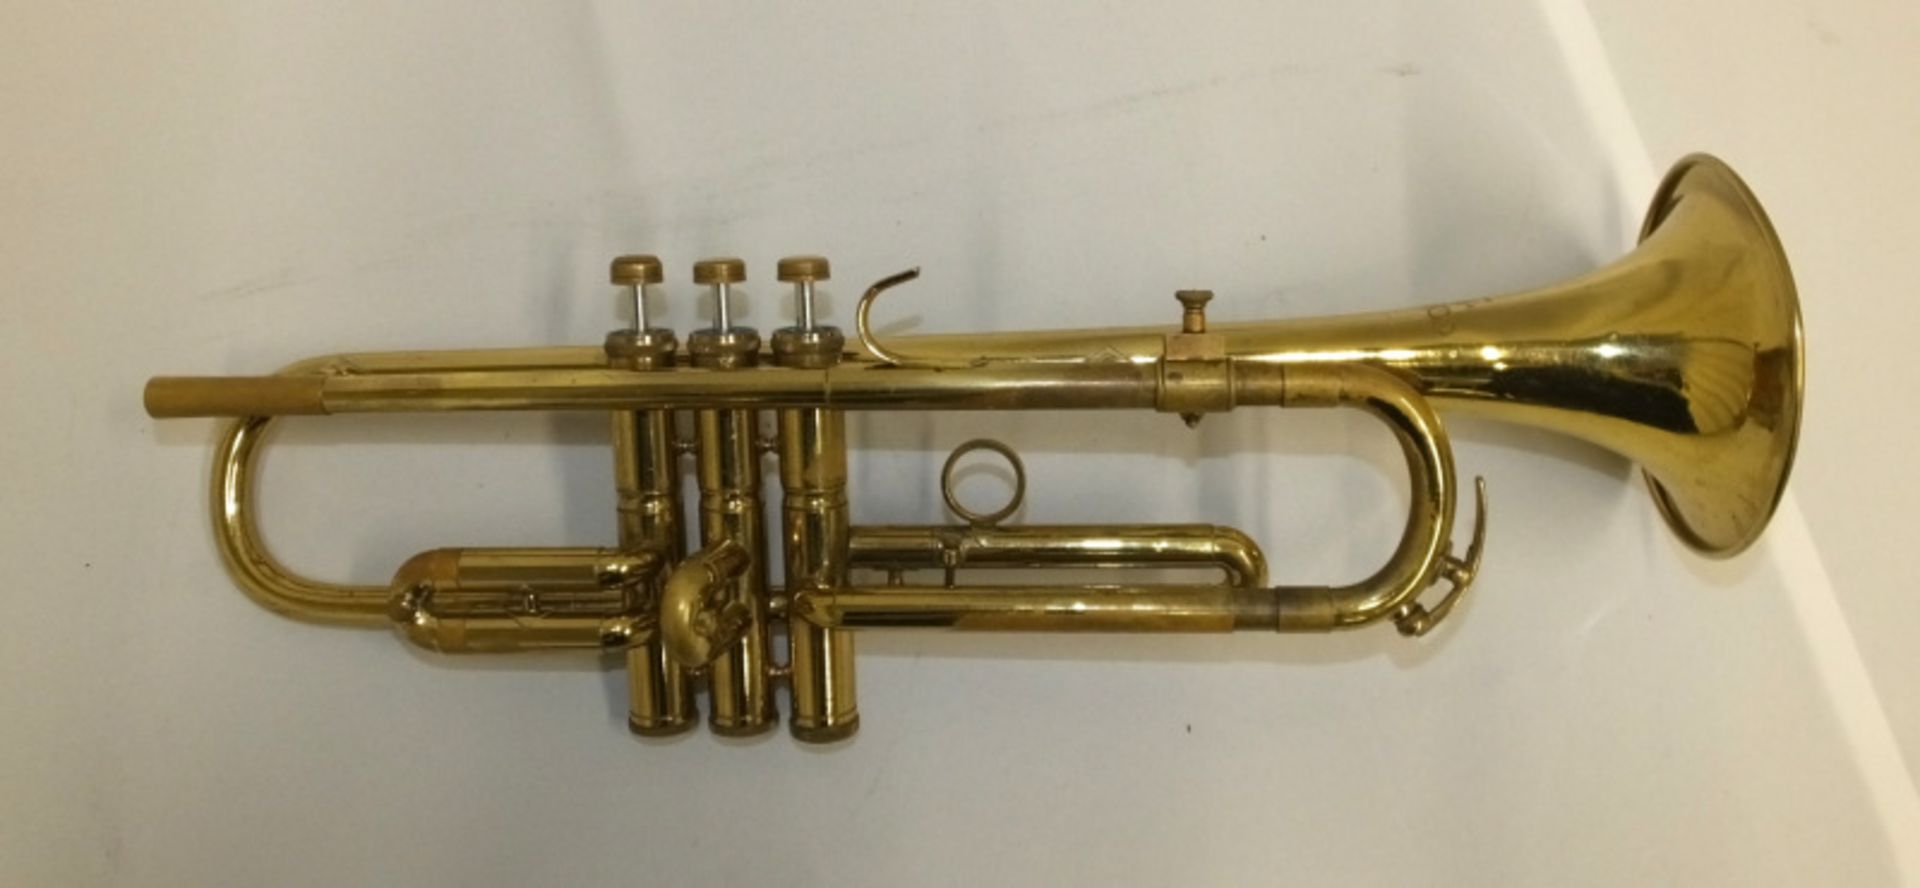 Corton 80 Trumpet in case - serial number 056226 - Please check photos carefully - Image 4 of 14